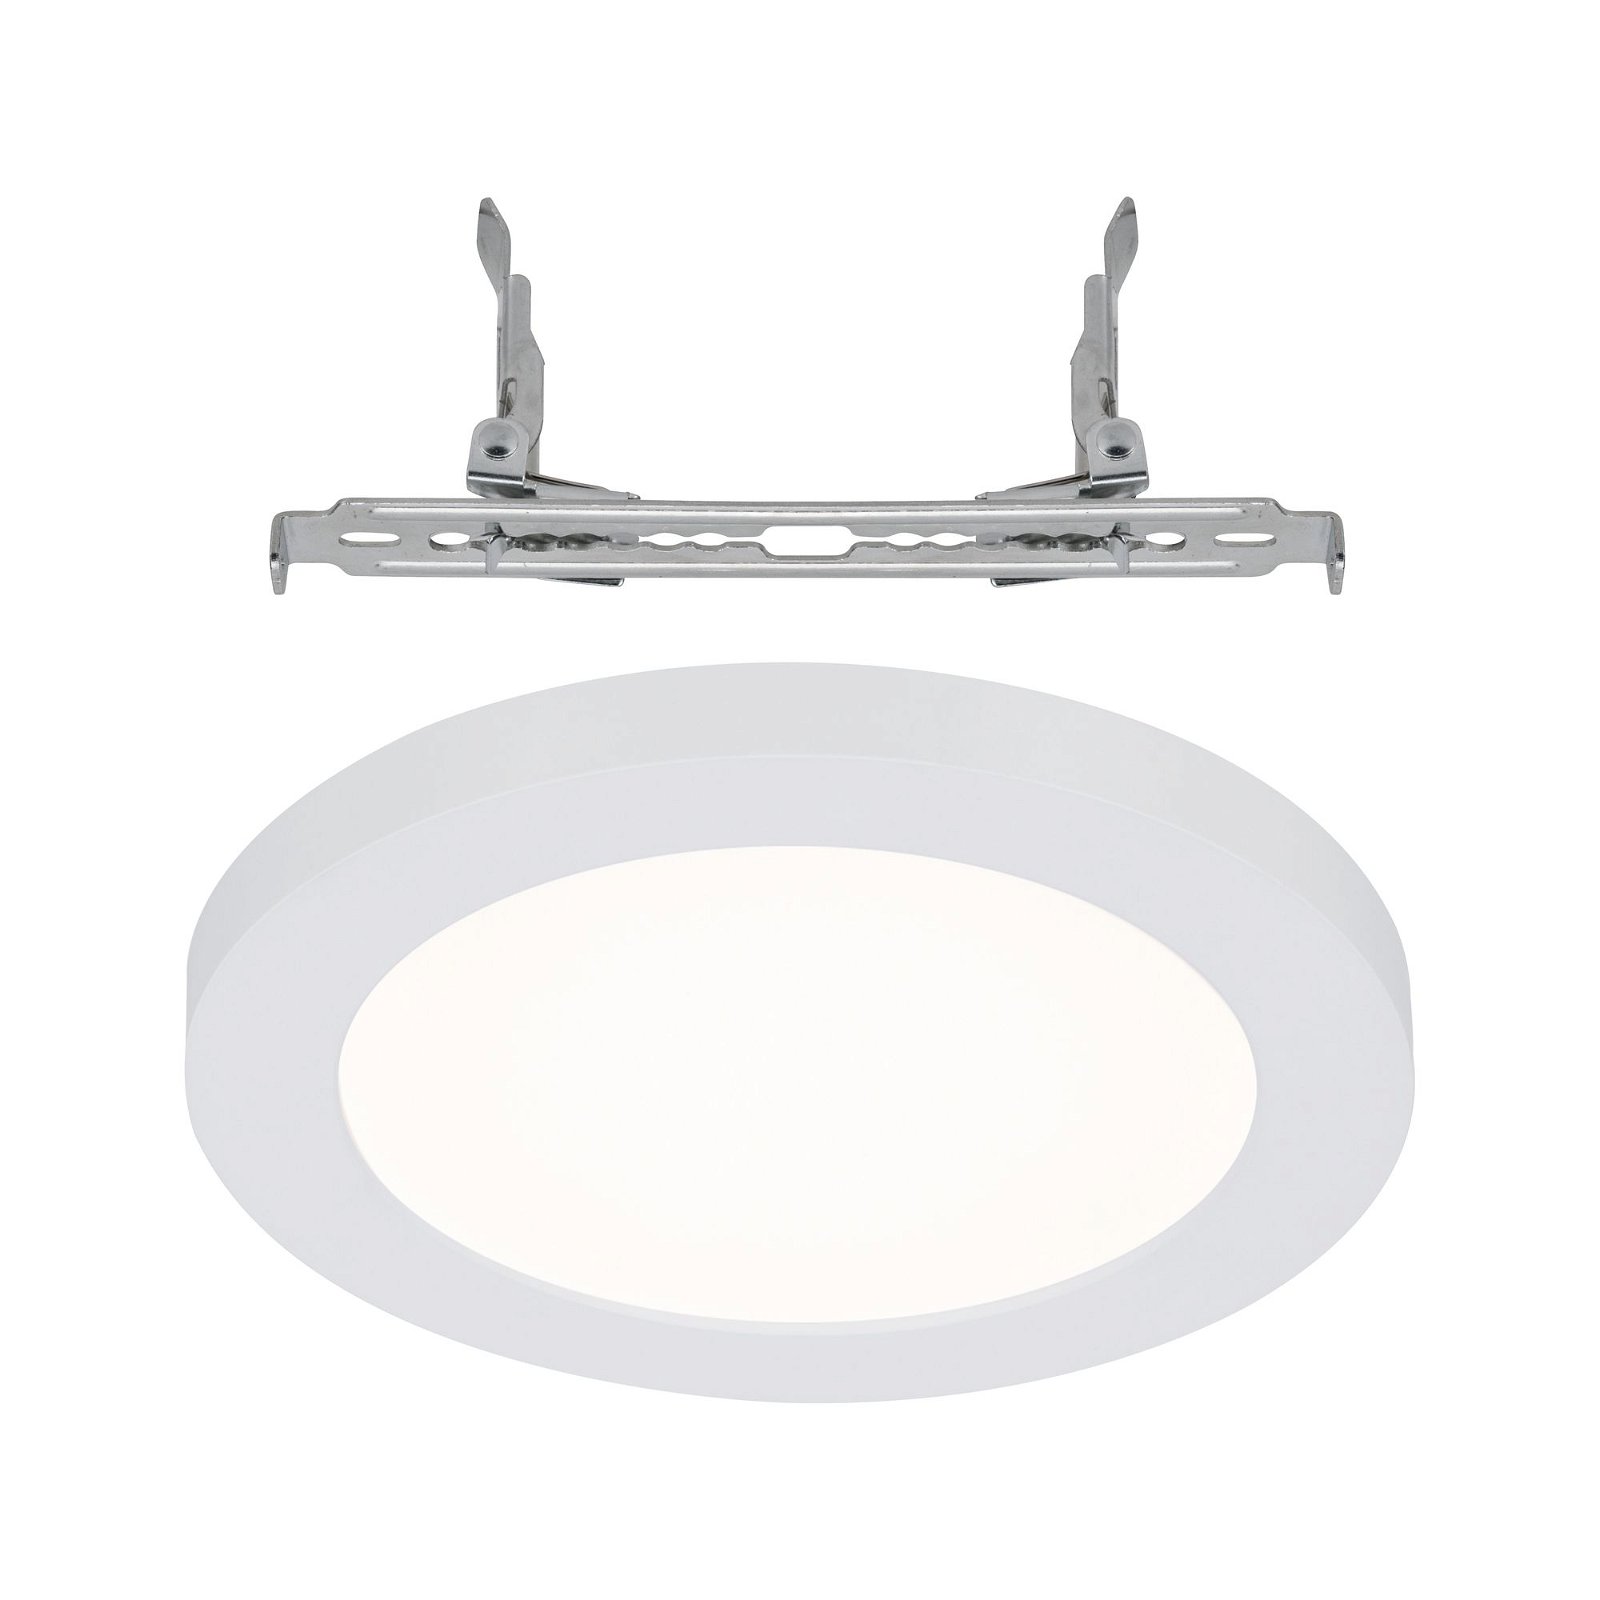 LED-inbouwpaneel Cover-it Promo rond 165mm 12W 1120lm 3000K Wit mat